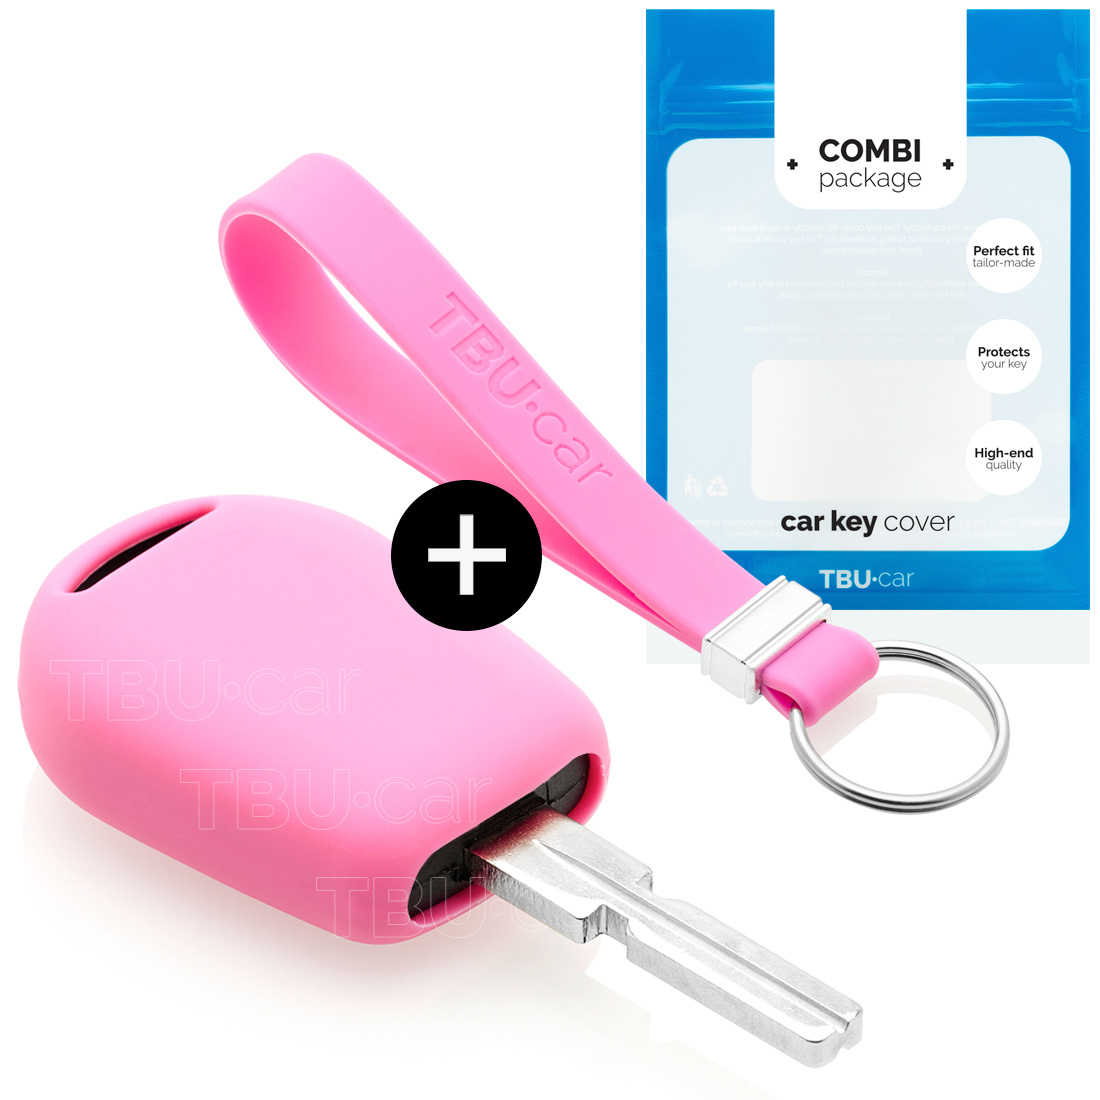 TBU car TBU car Car key cover compatible with BMW - Silicone Protective Remote Key Shell - FOB Case Cover - Pink